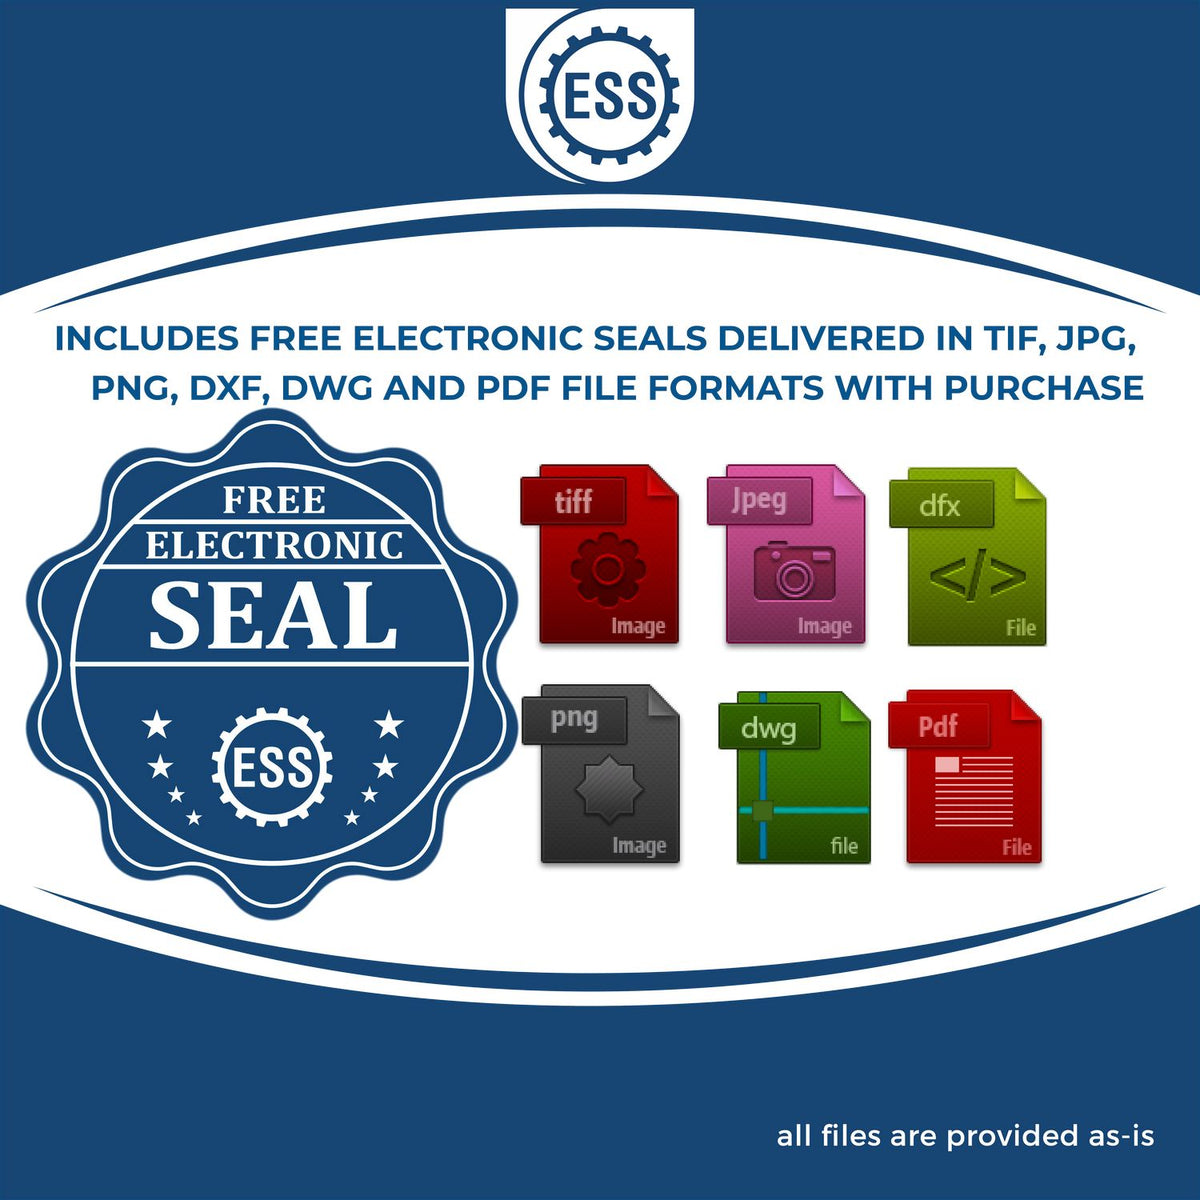 An infographic for the free electronic seal for the Slim Pre-Inked Guam Land Surveyor Seal Stamp illustrating the different file type icons such as DXF, DWG, TIF, JPG and PNG.